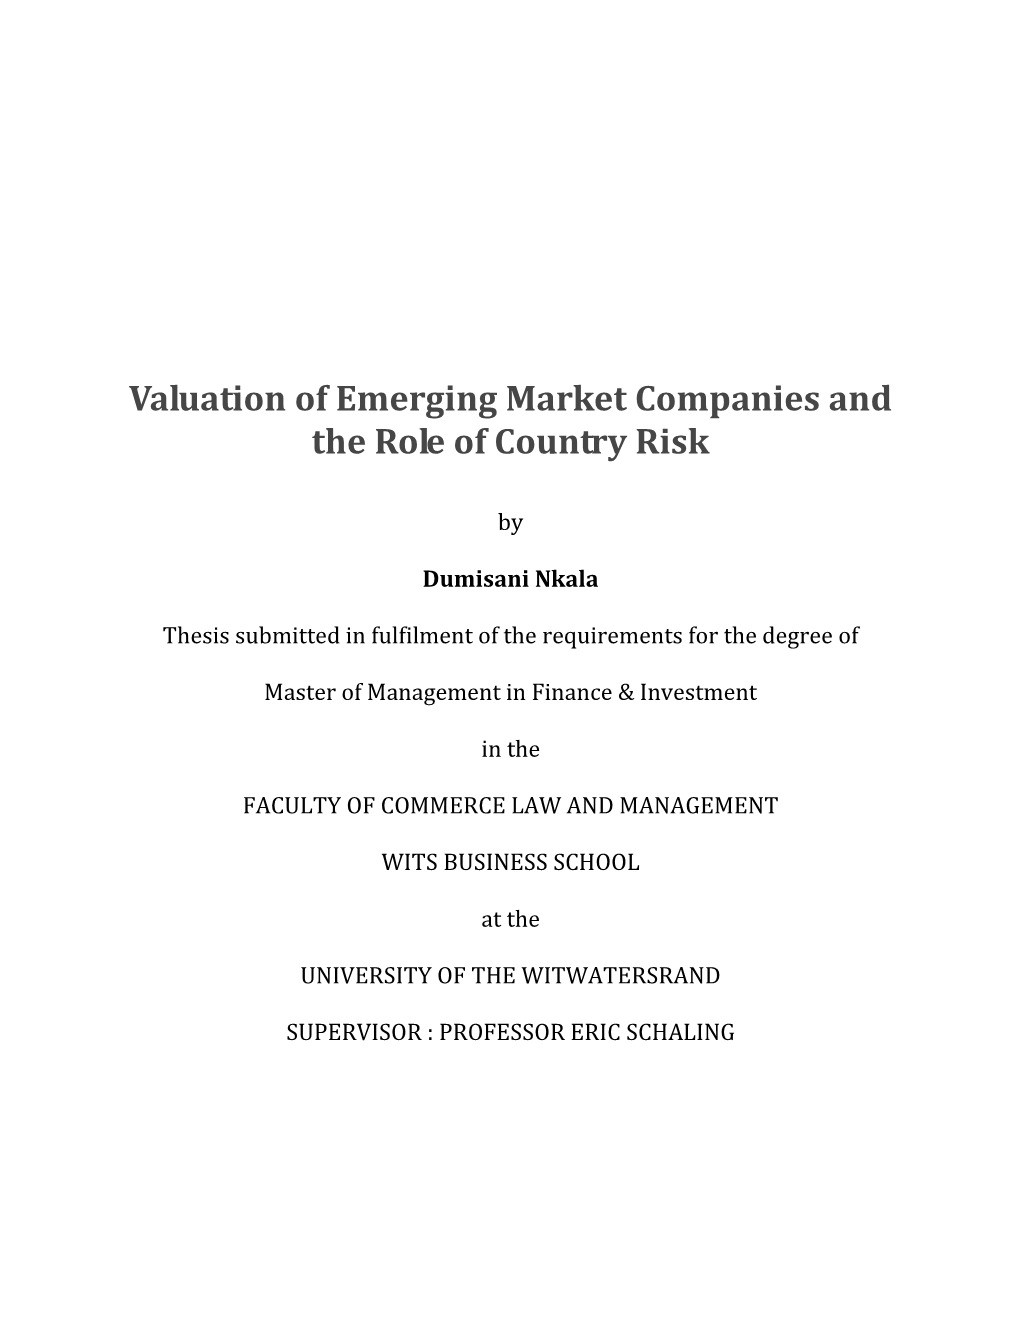 Valuation of Emerging Market Companies and the Role of Country Risk